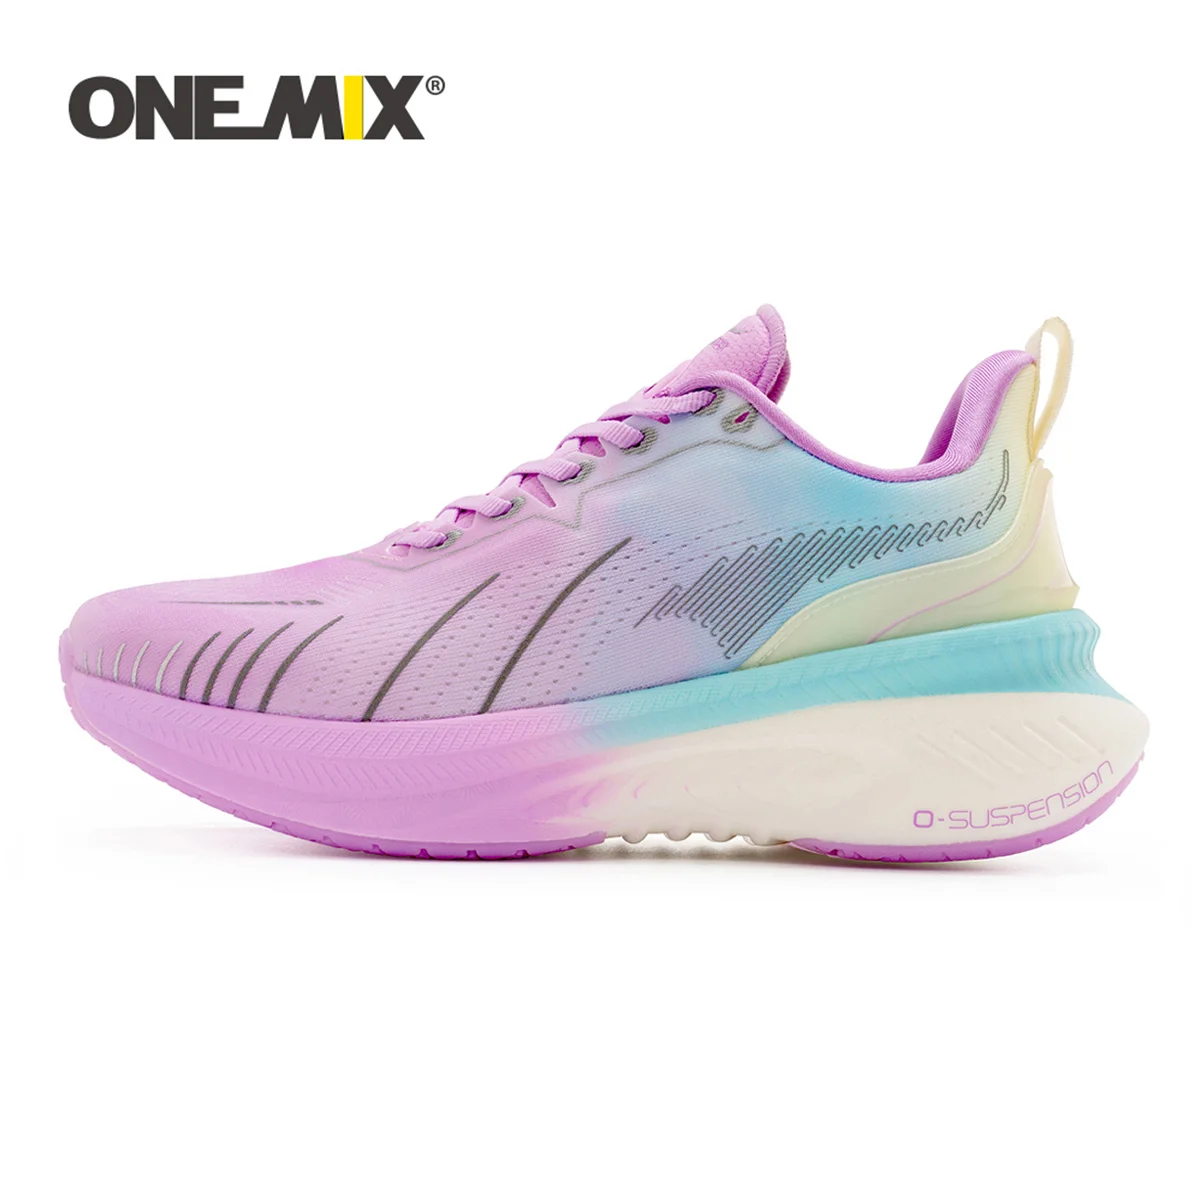 

ONEMIX Running Shoes For Man Fitness Train Jogging Cushioning Sport Shoes Breathable Mesh Women's Outdoor Walking Light Sneakers